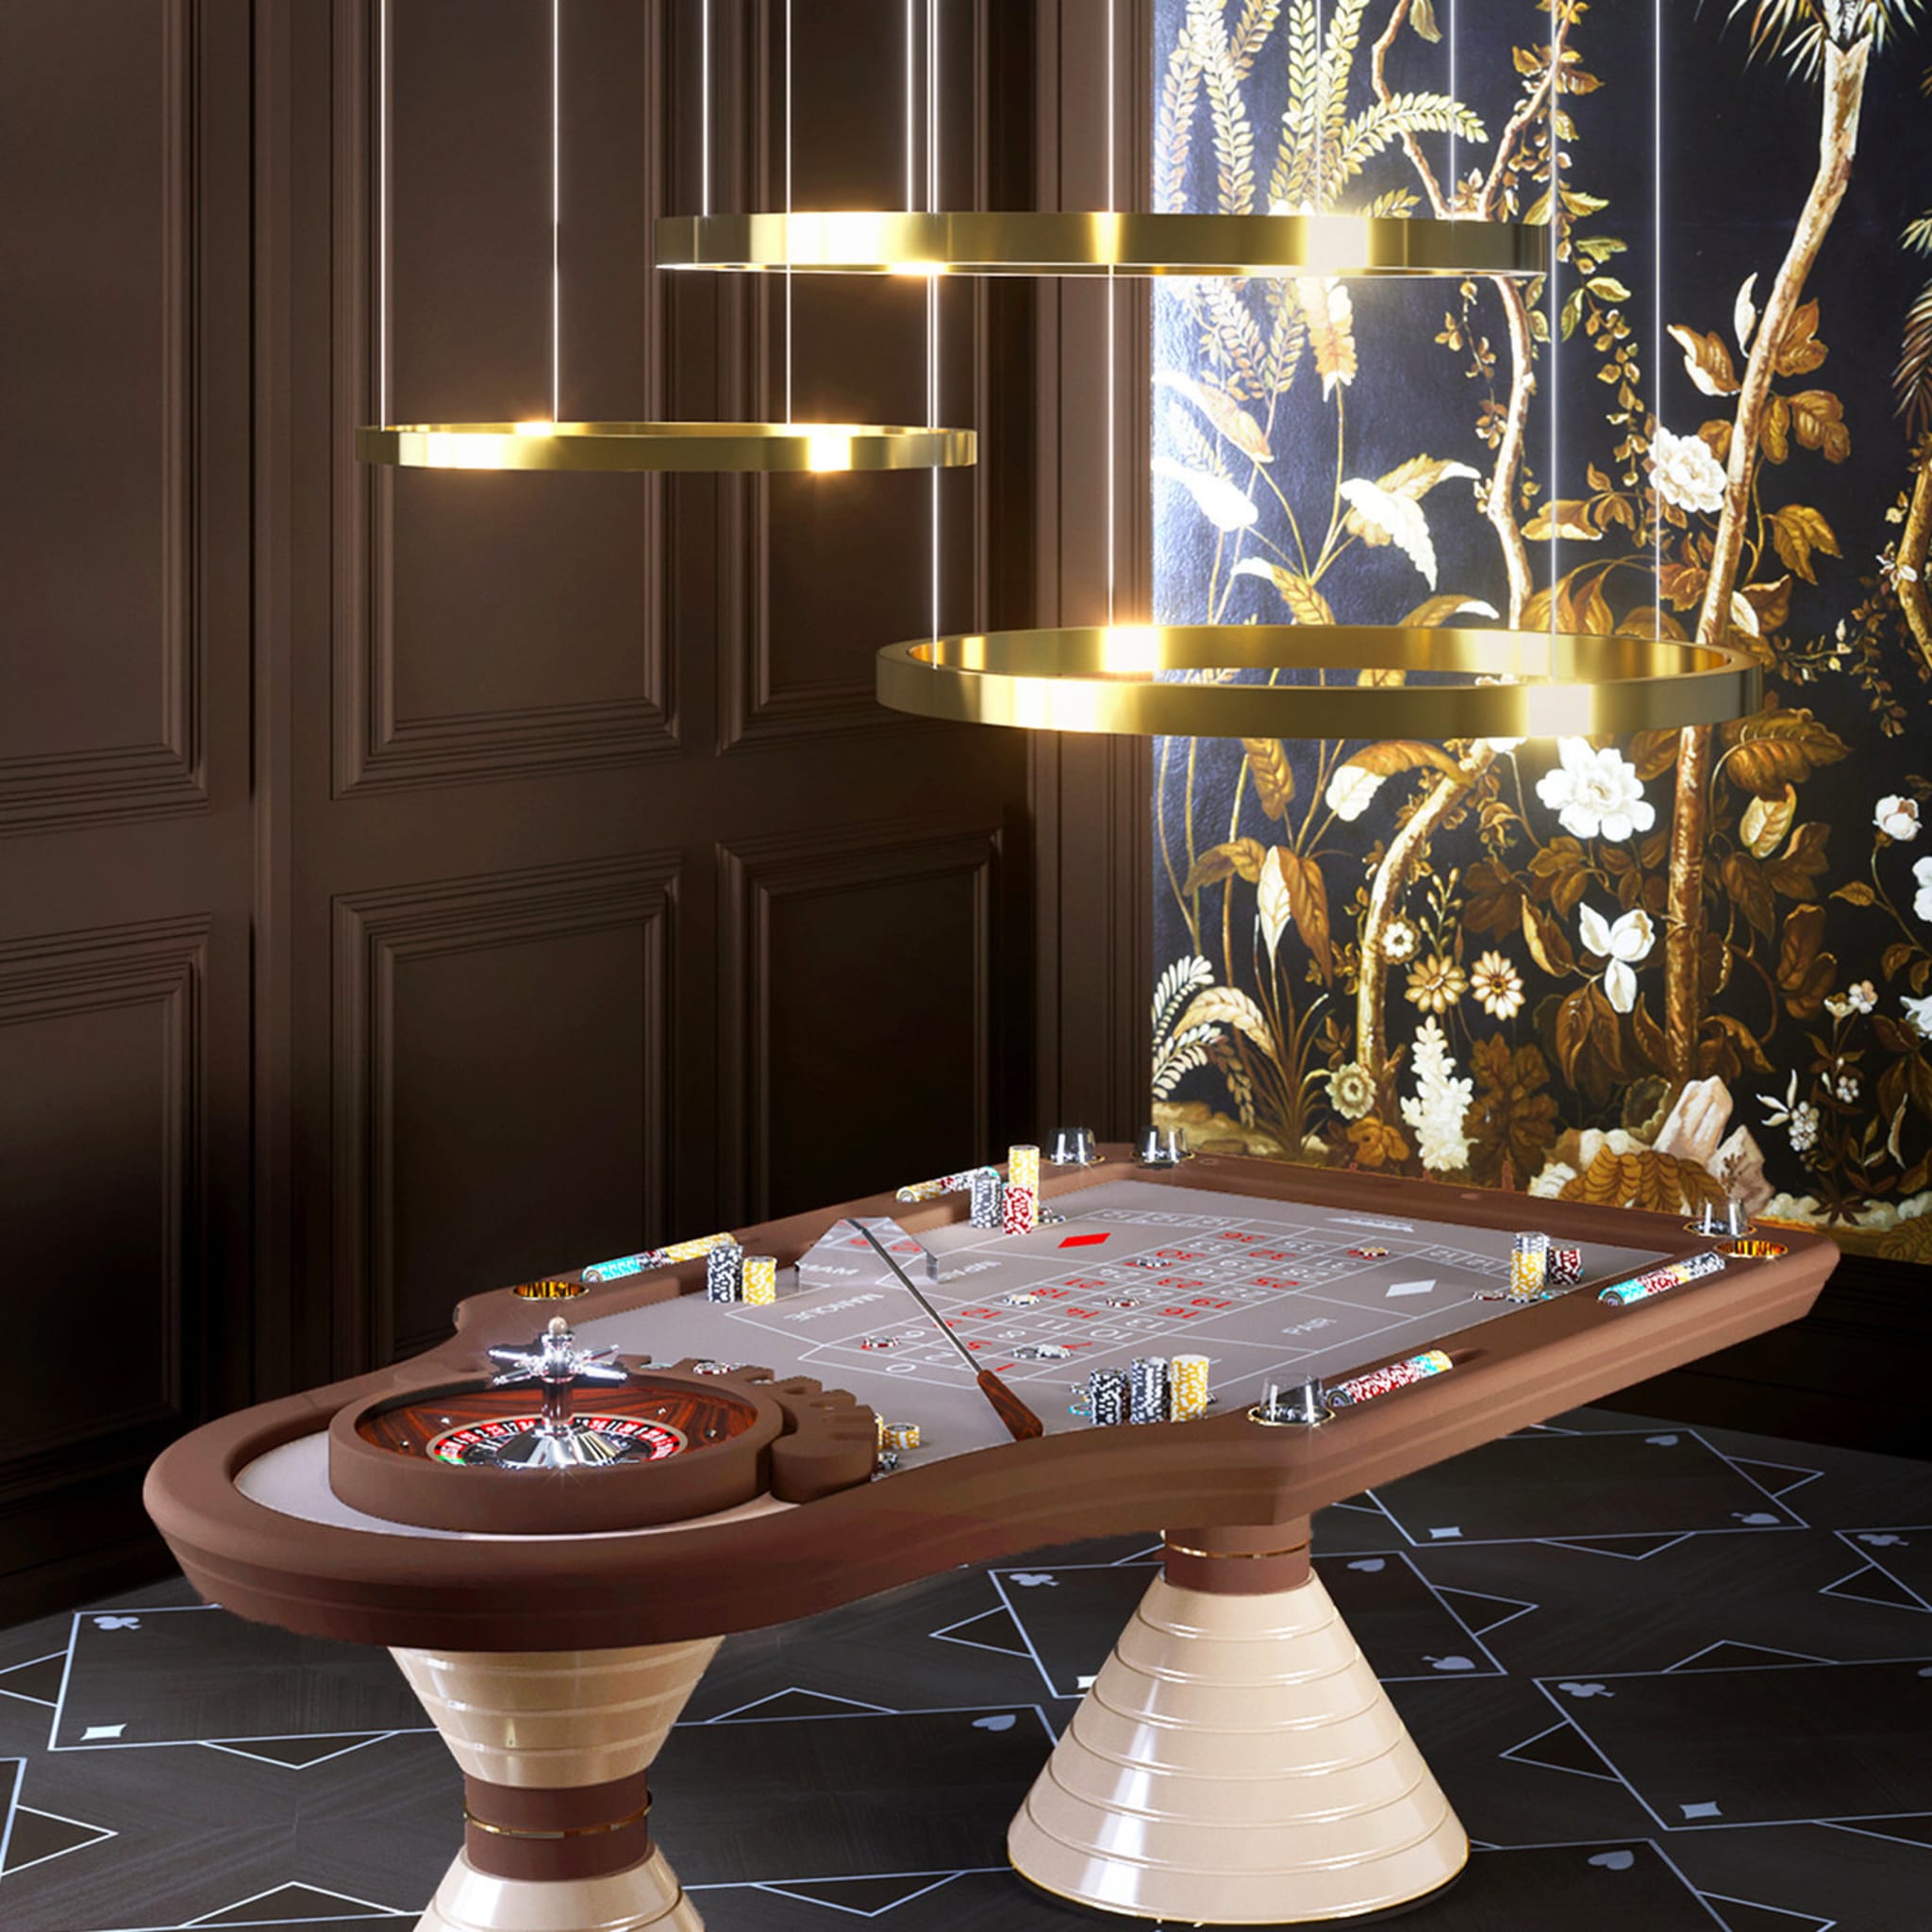 Roulette table by Pino Vismara - Alternative view 1